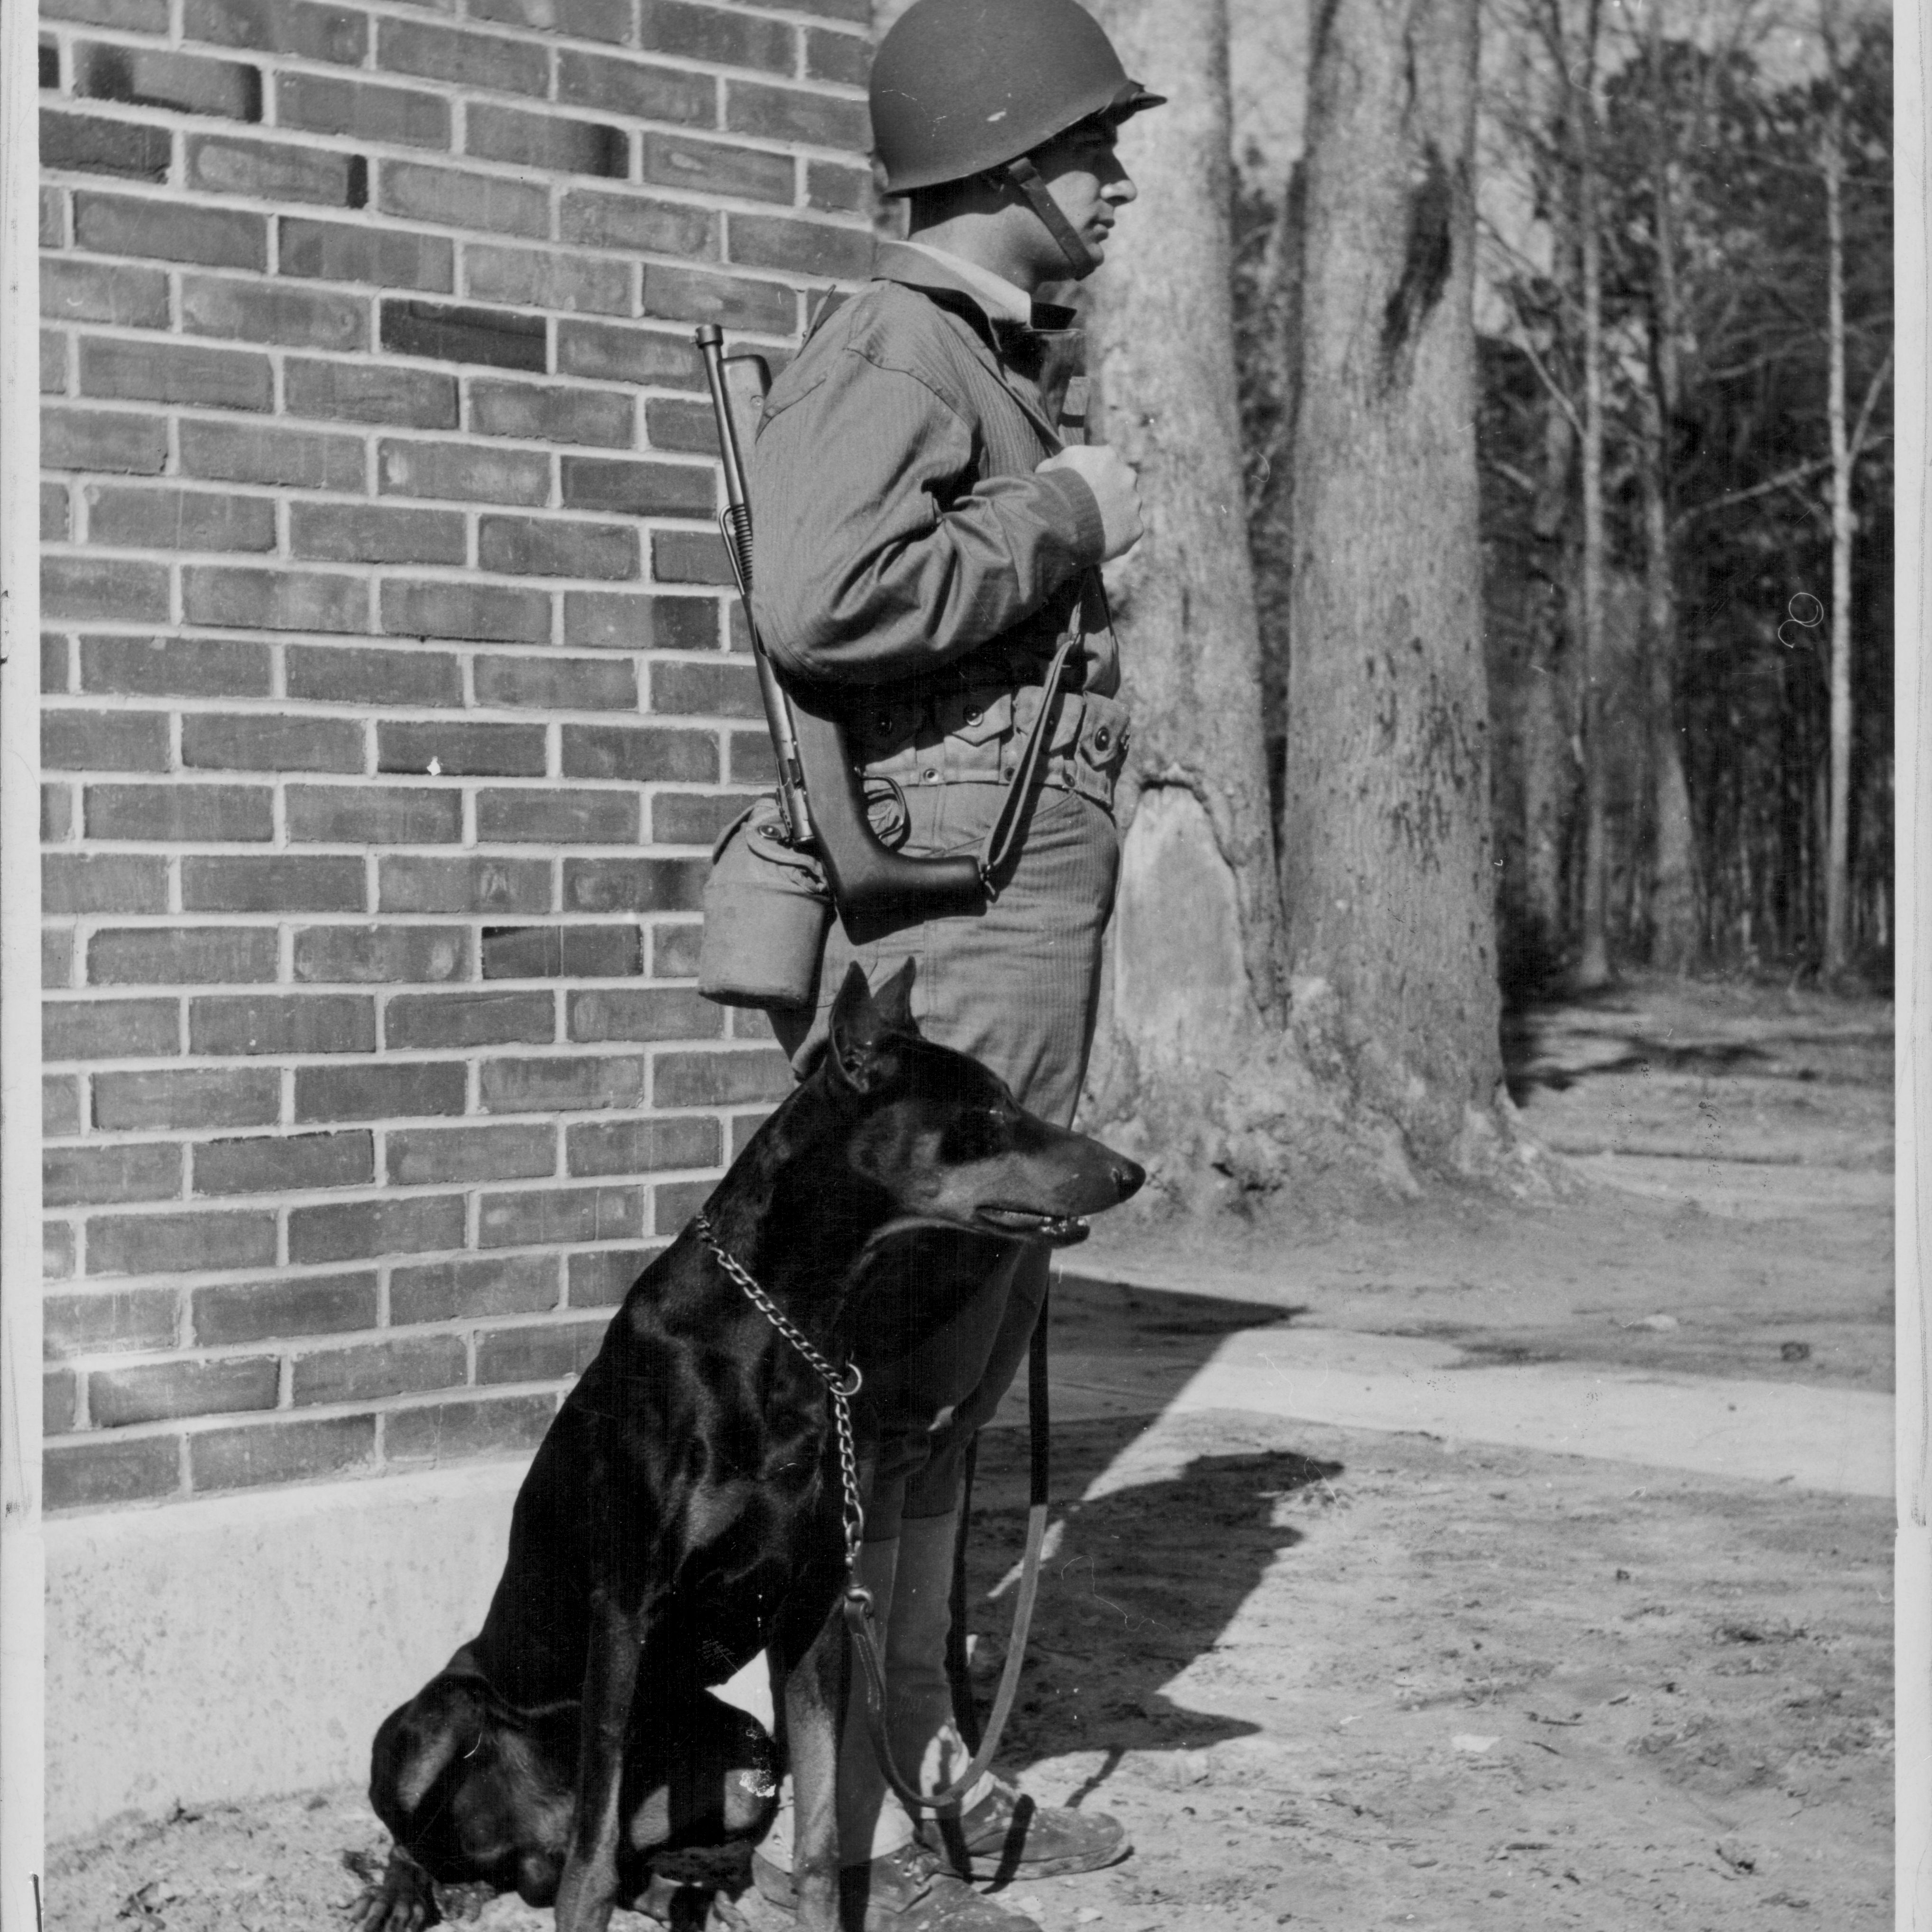 Private 'Jan', an enlisted Doberman, being trained at Marine Corps Base Camp Lejeune during World War Two, North Carolina, USA, circa 1941-1945.